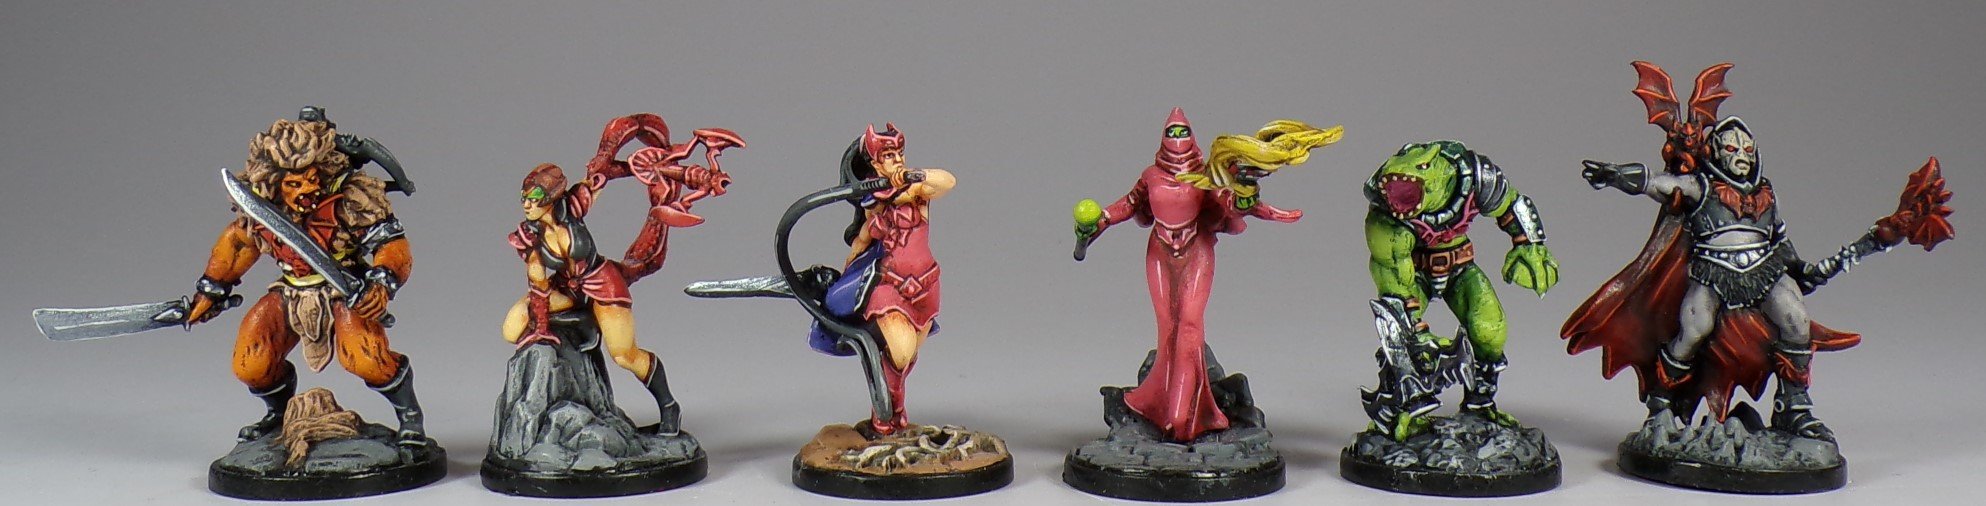 Paintedfigs Masters of the Universe Clash for Eternia miniature painting service (17).jpg